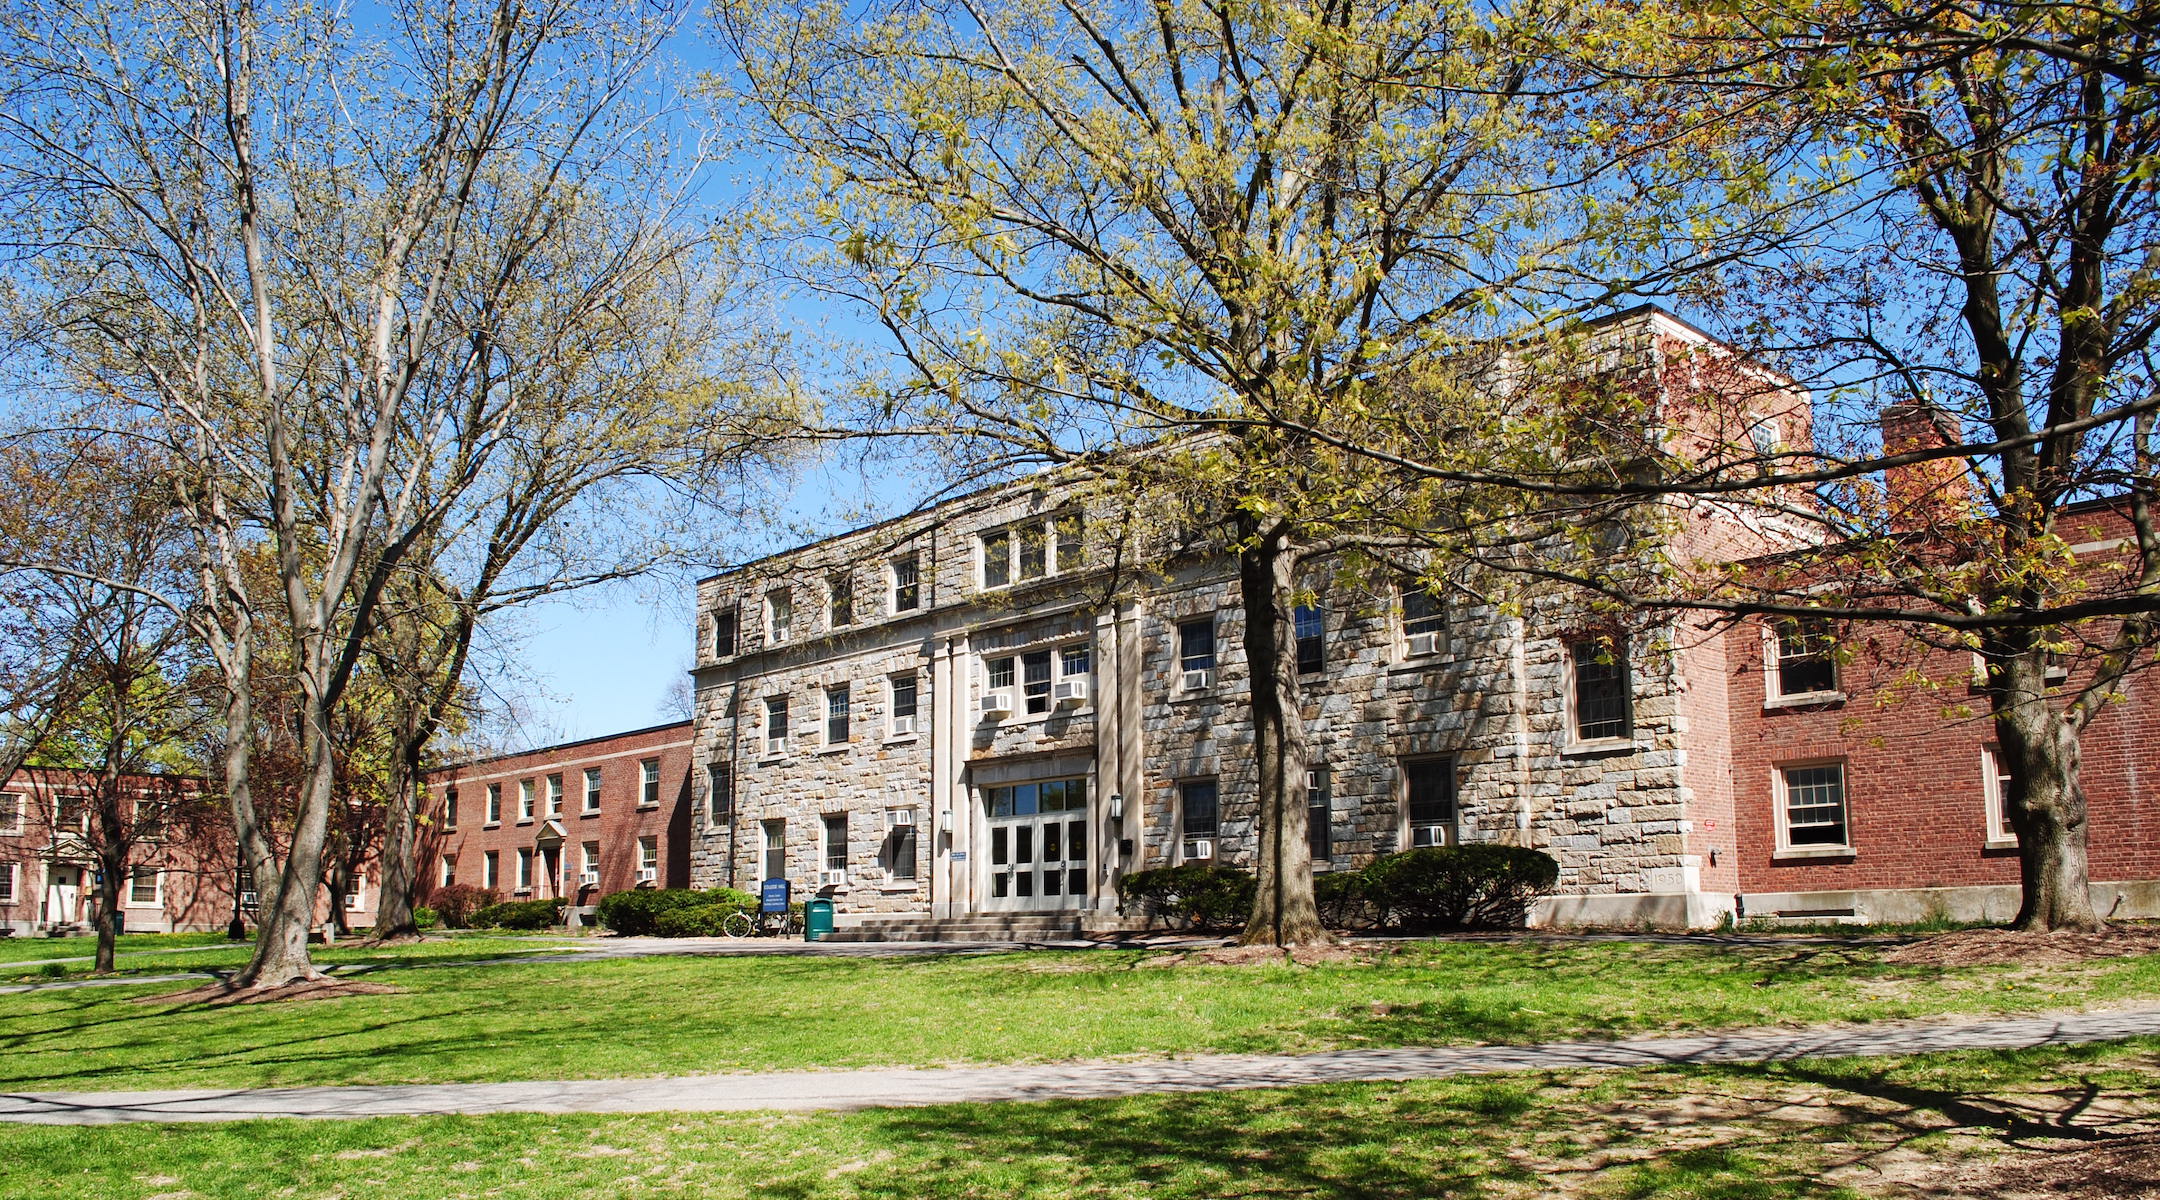 College Hall at SUNY New Paltz in New Paltz, New York, May 1, 2013. (crz4mets2 via Wikimedia Commons)